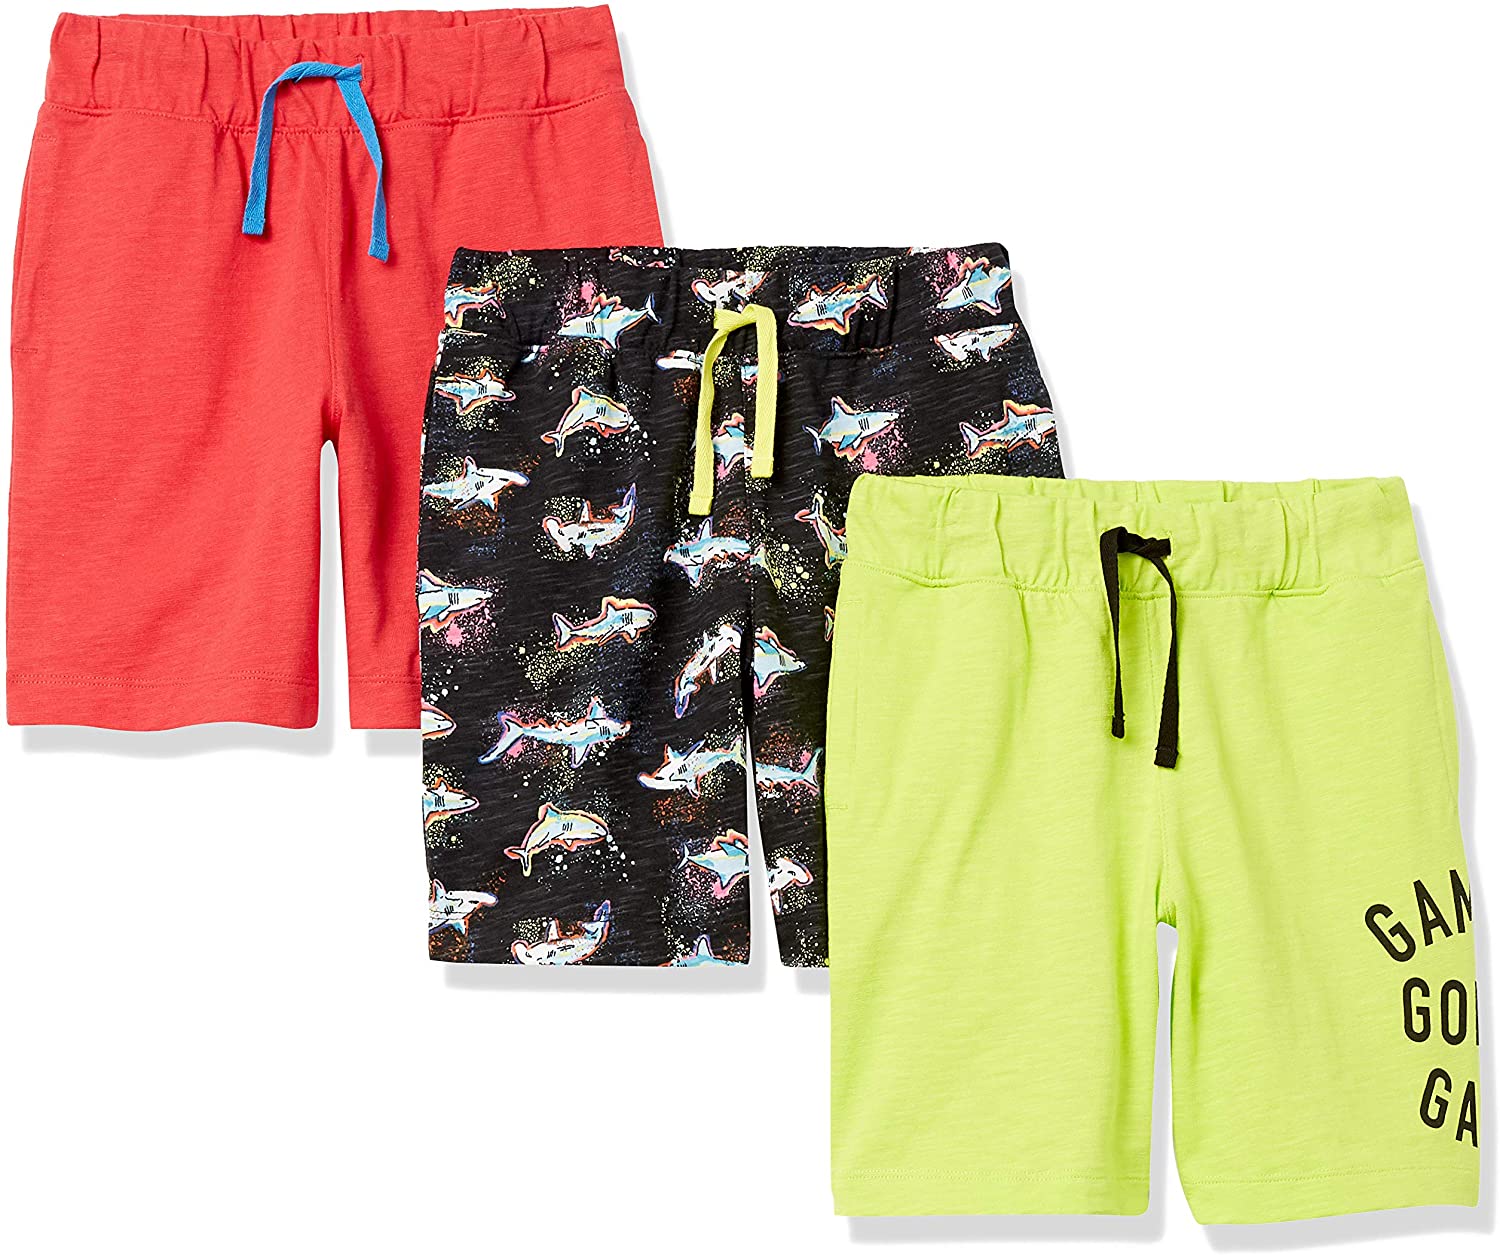 Clothing Shoes & Jewelry Spotted Zebra Boys' Knit Jersey Play Shorts